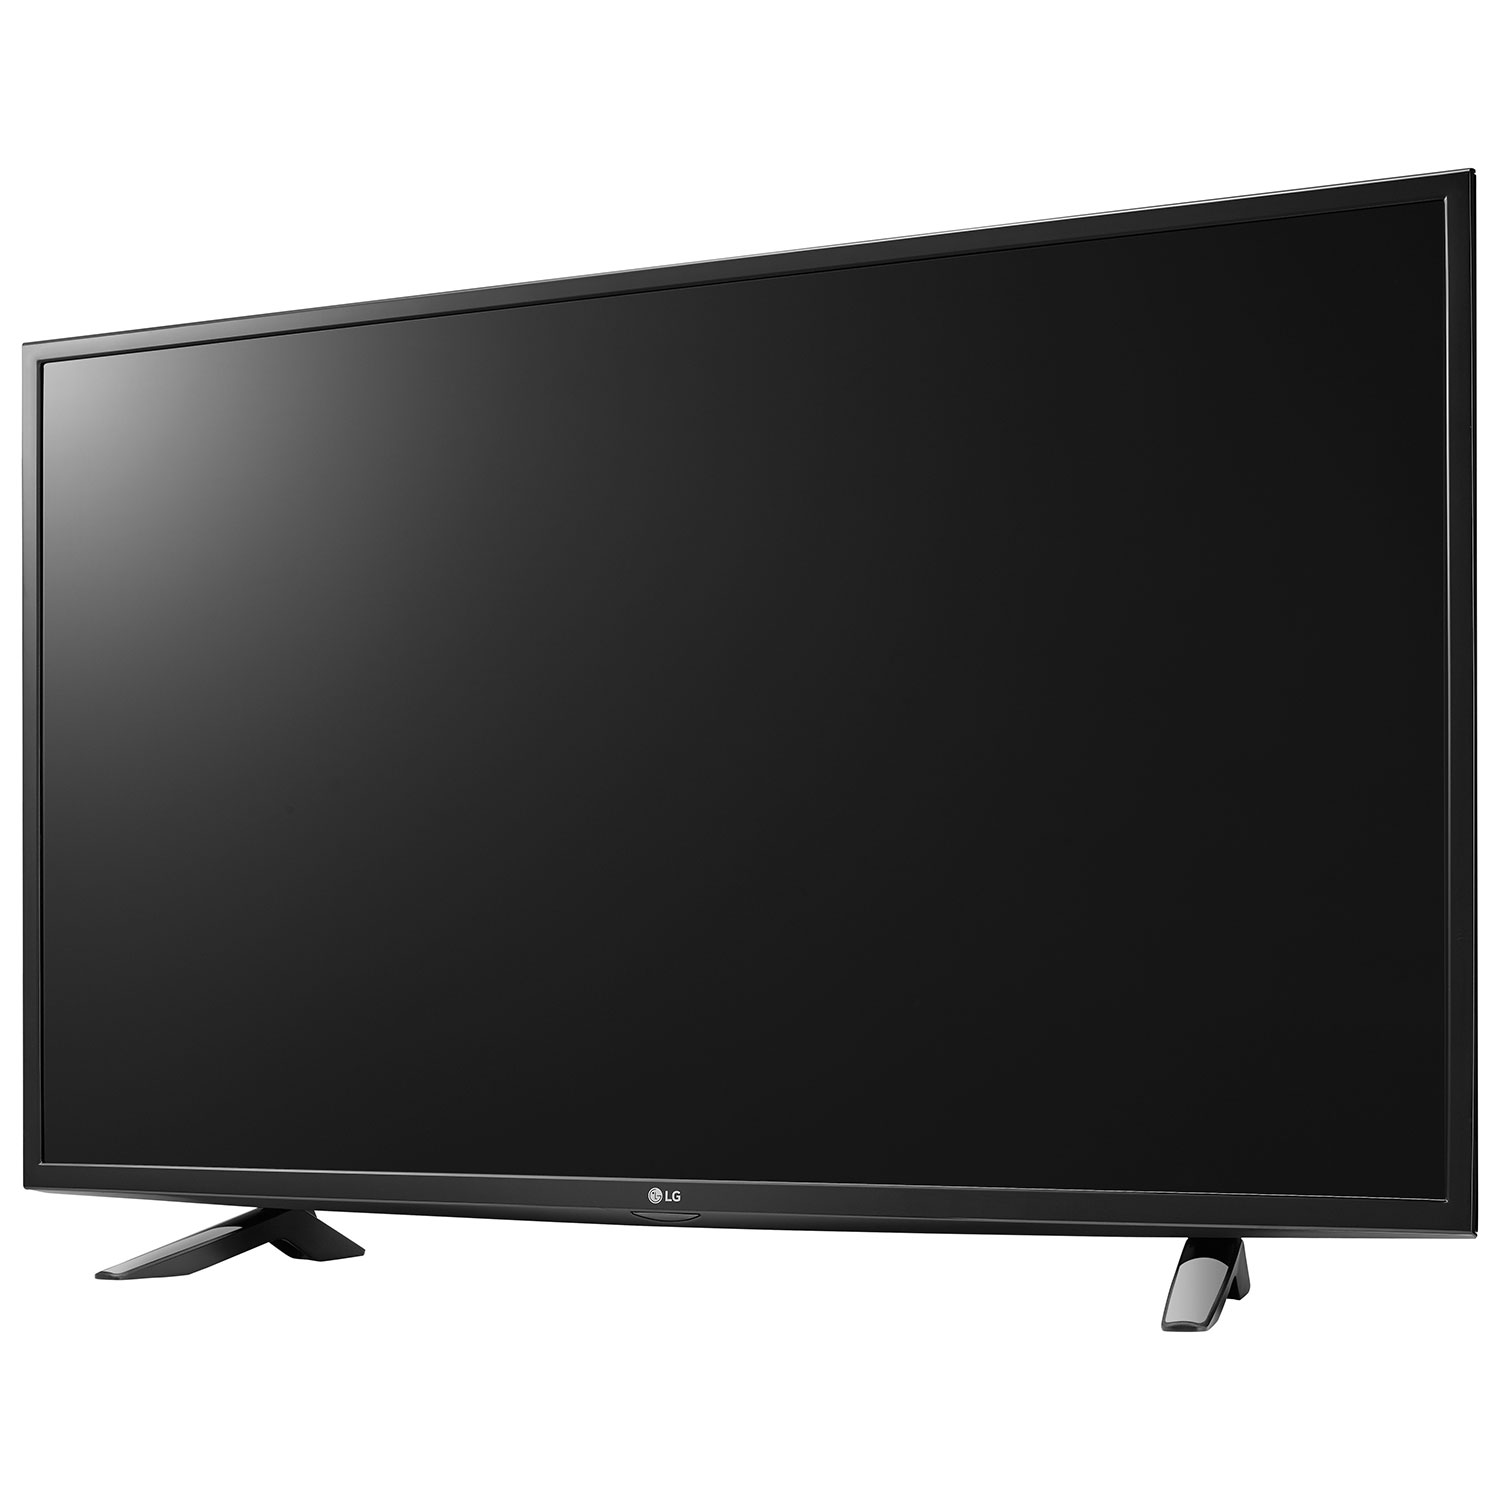 What are some positively reviewed LG televisions?